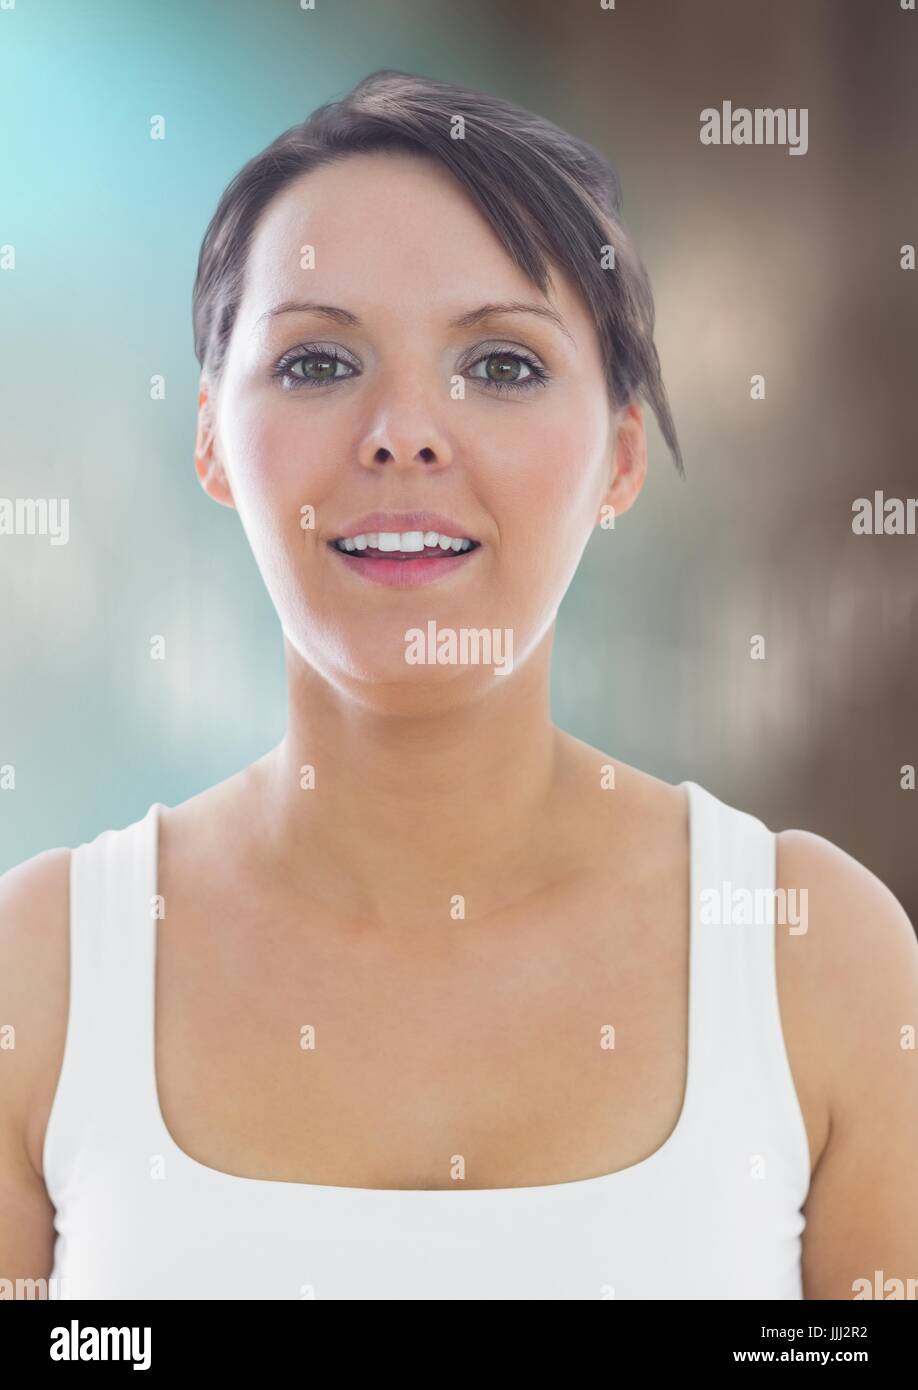 Woman in tank top against blurry blue brown background Stock Photo